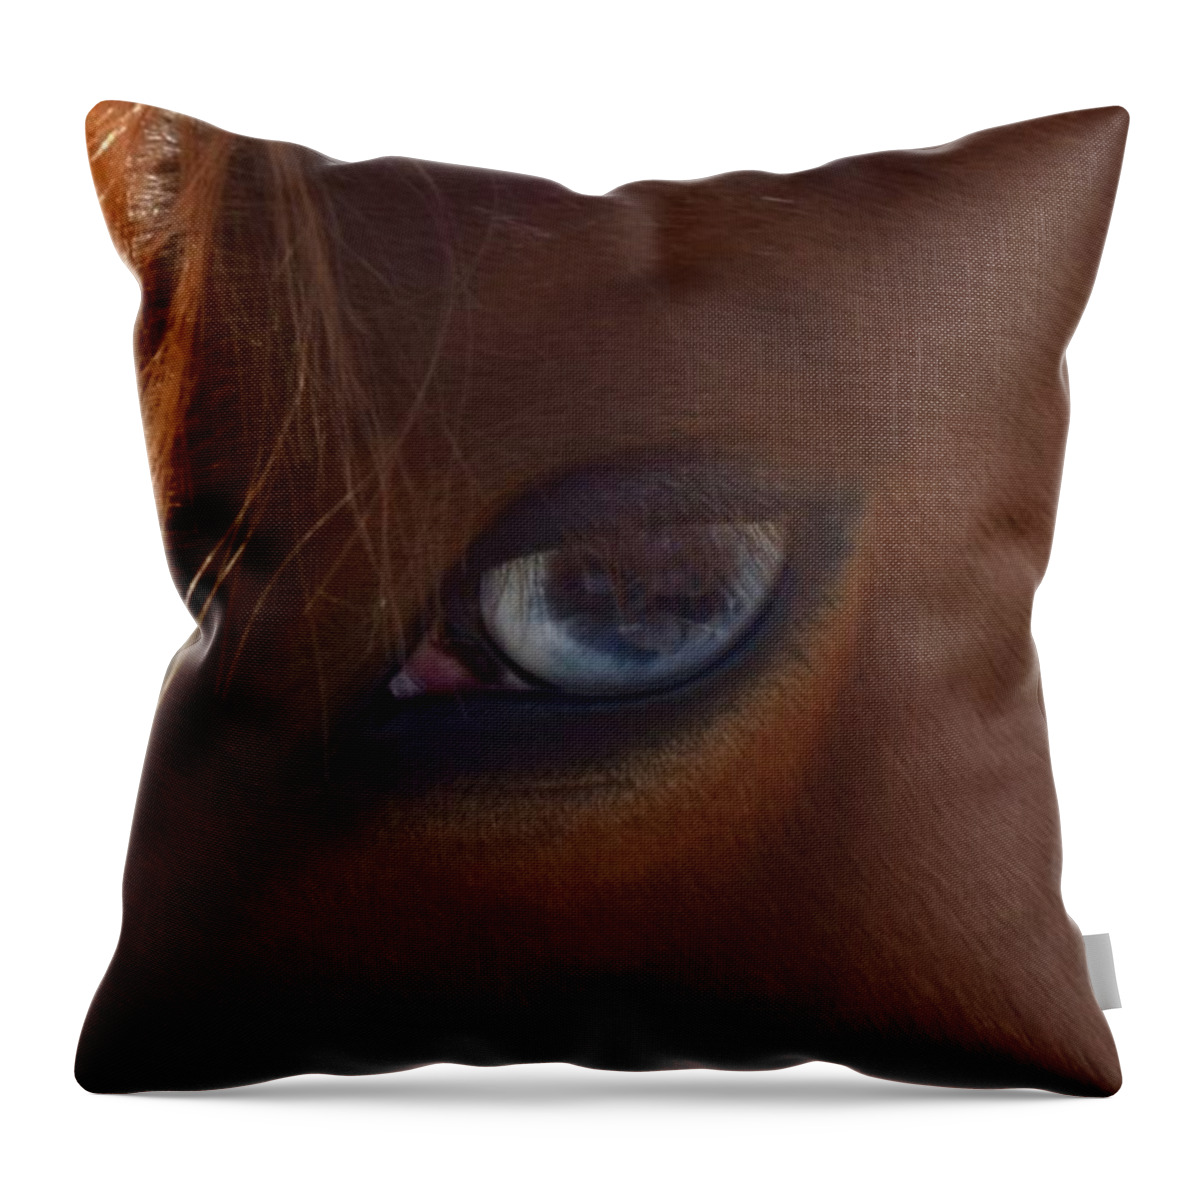 Barrieloustark Throw Pillow featuring the photograph Really? by Barrie Stark